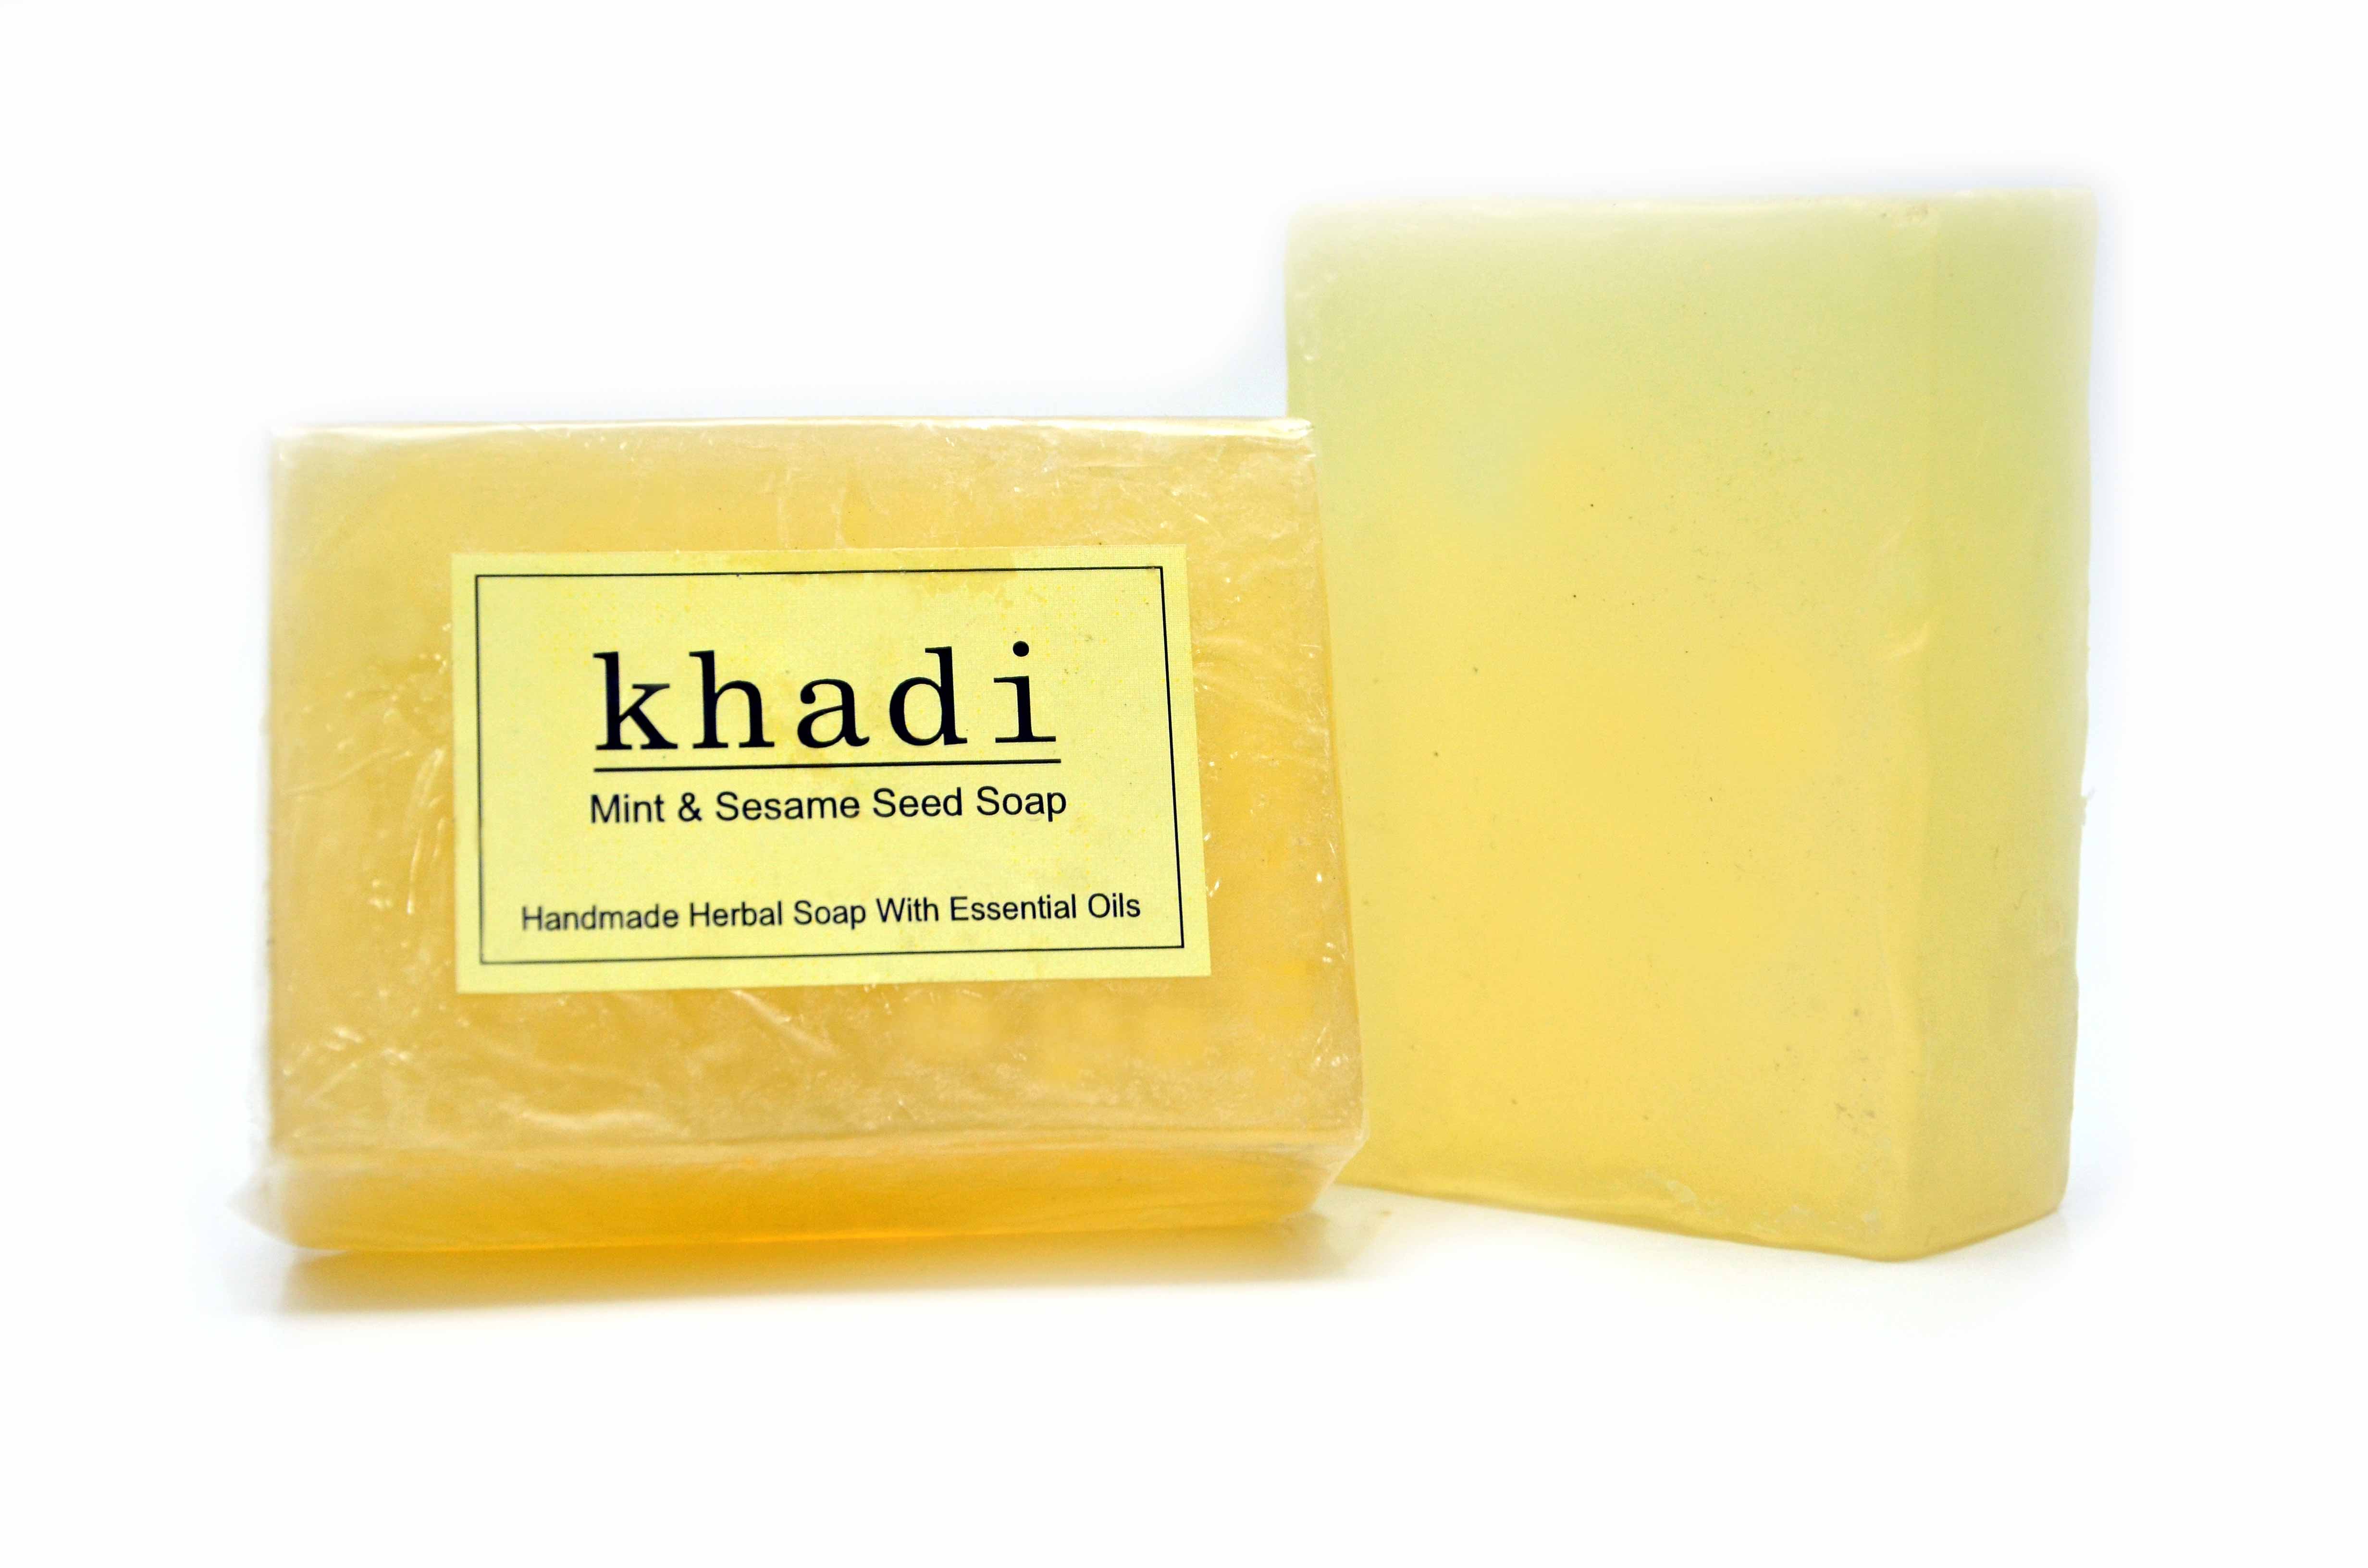 Buy Vagad's Khadi Mint And Sesame Seed Soap at Best Price Online